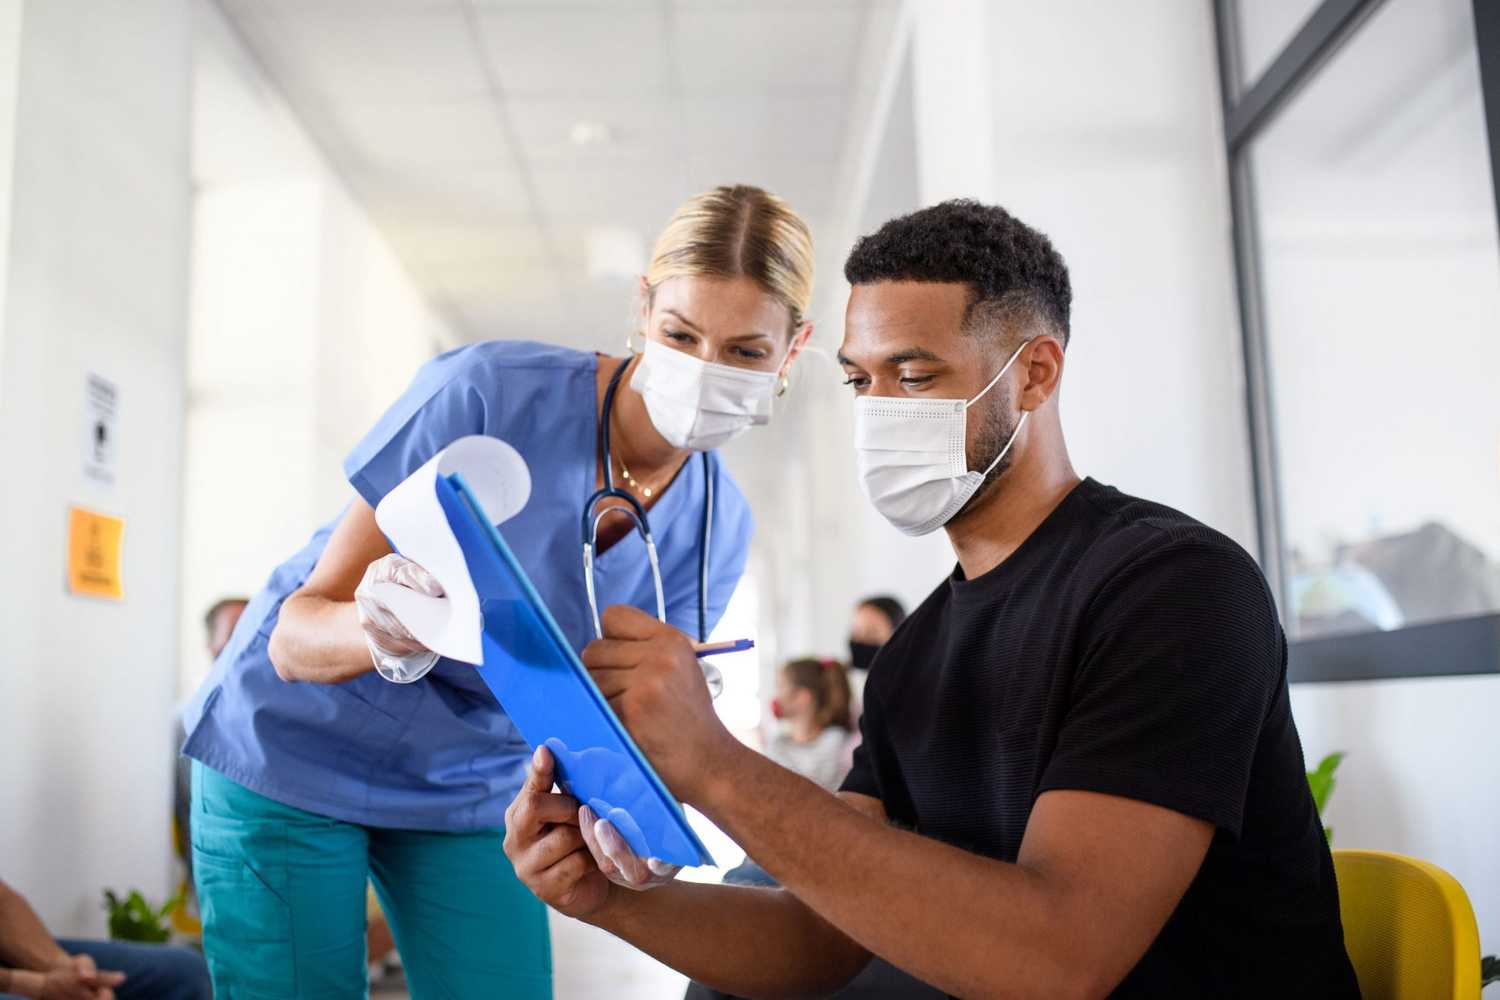 A doctor wearing a mask, helping a patient fill out a form, who is also wearing a mask